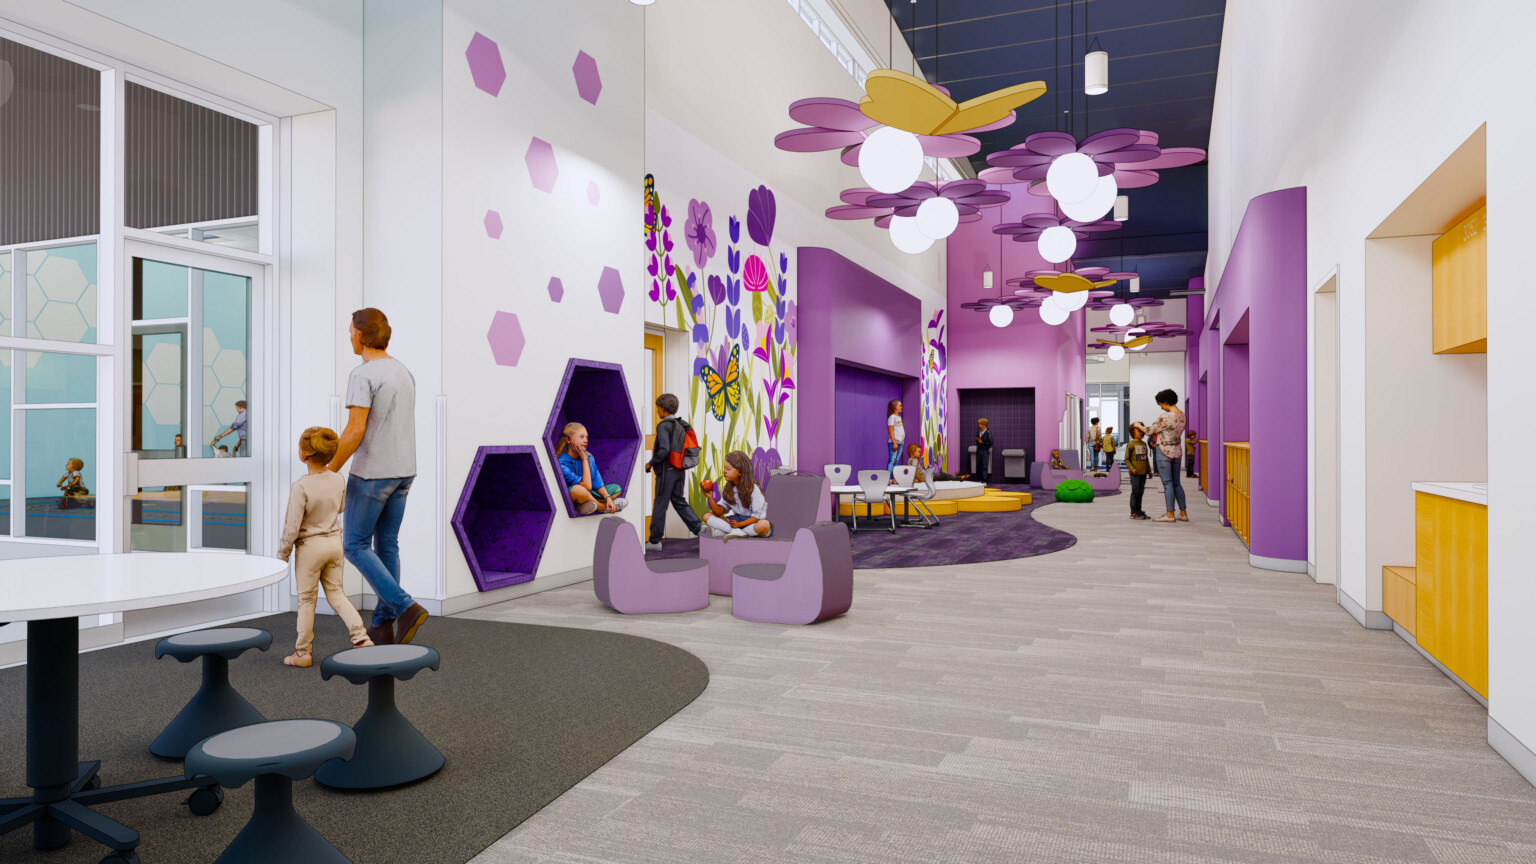 White double height learning pod hallway with flower mural, purple accent walls, flower shaped accents hang with globe light center